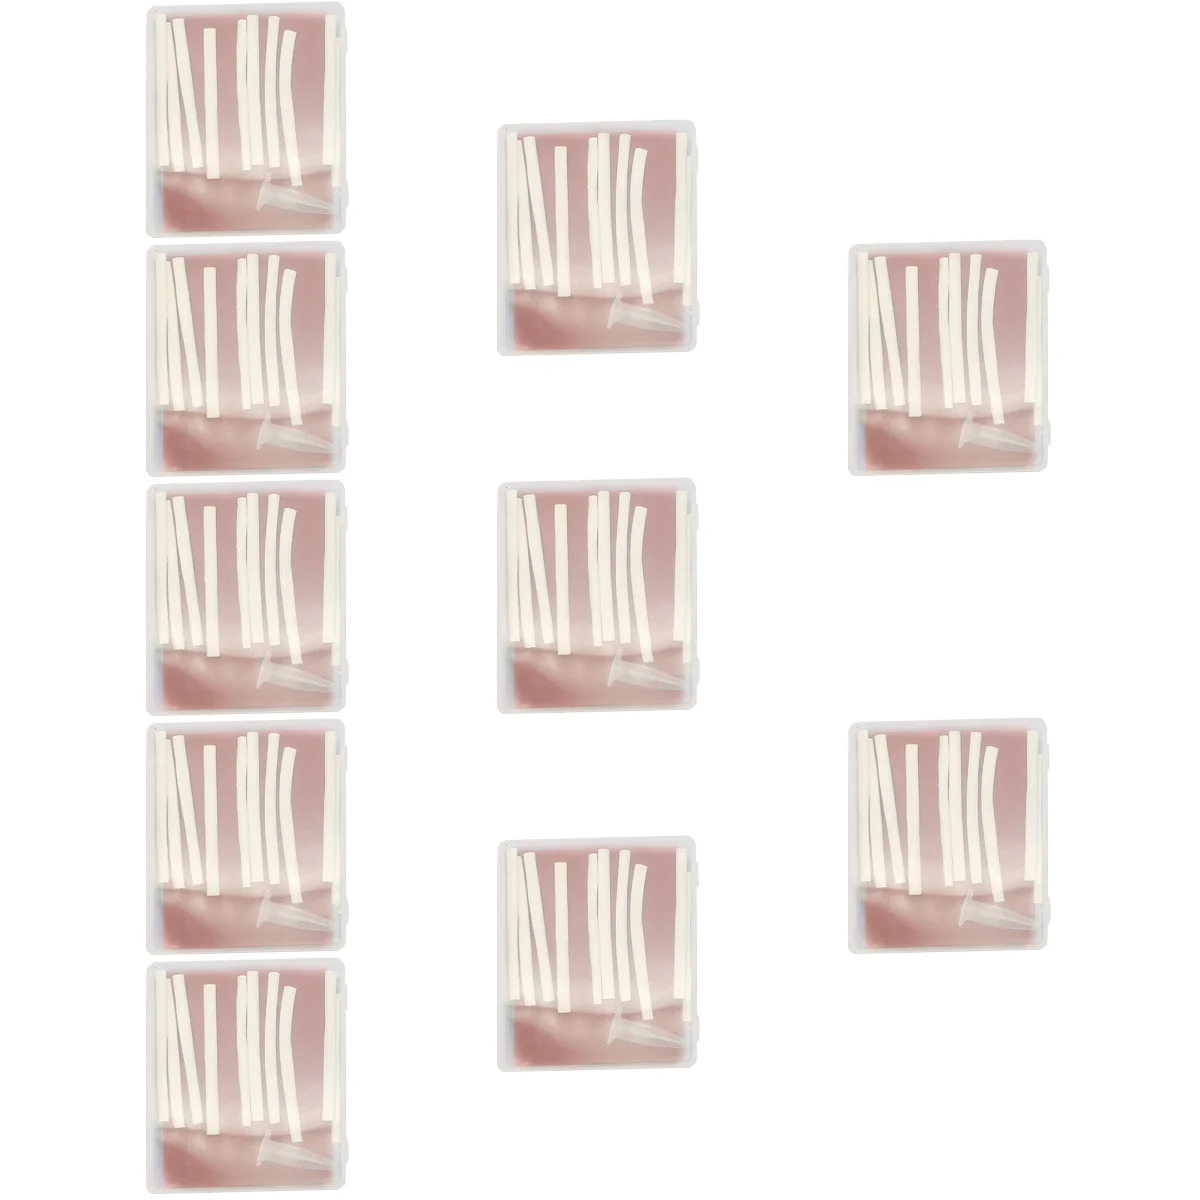 

10 Sets Tuile Molds Silicone Tool Silicone Teaching Aids Vascular Surgery Models Silica Gel Student